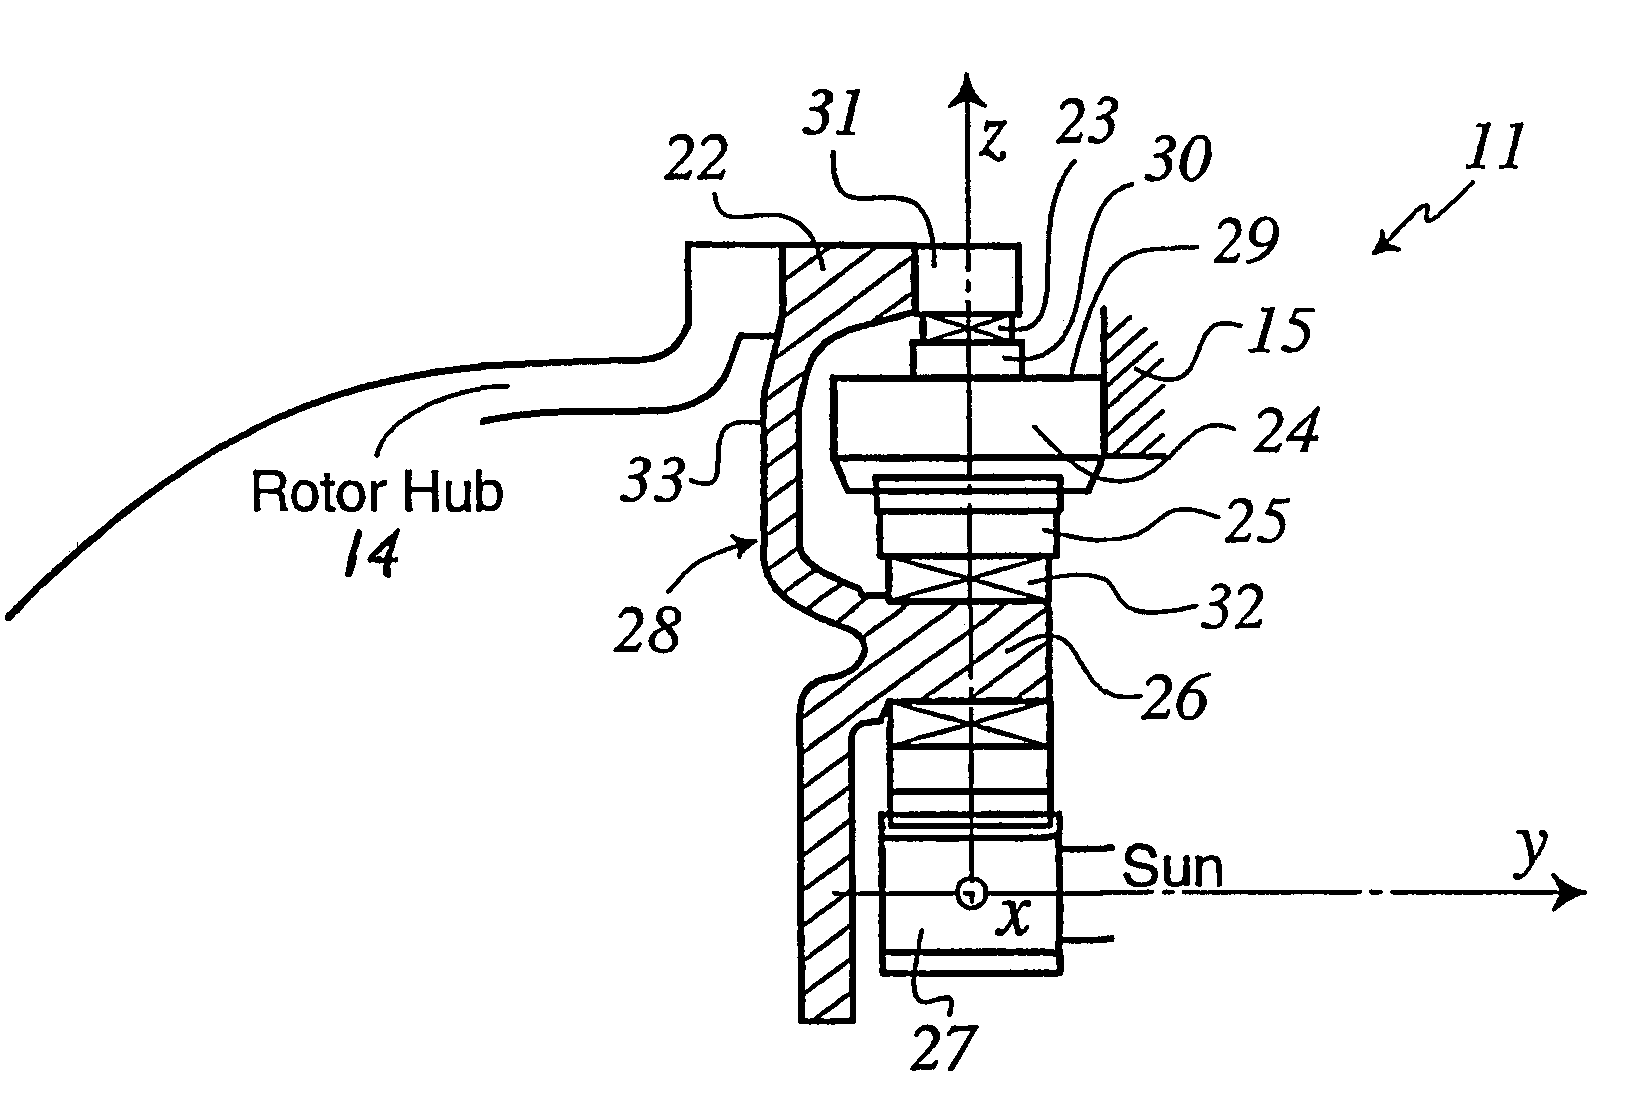 Drive assembly for wind turbines